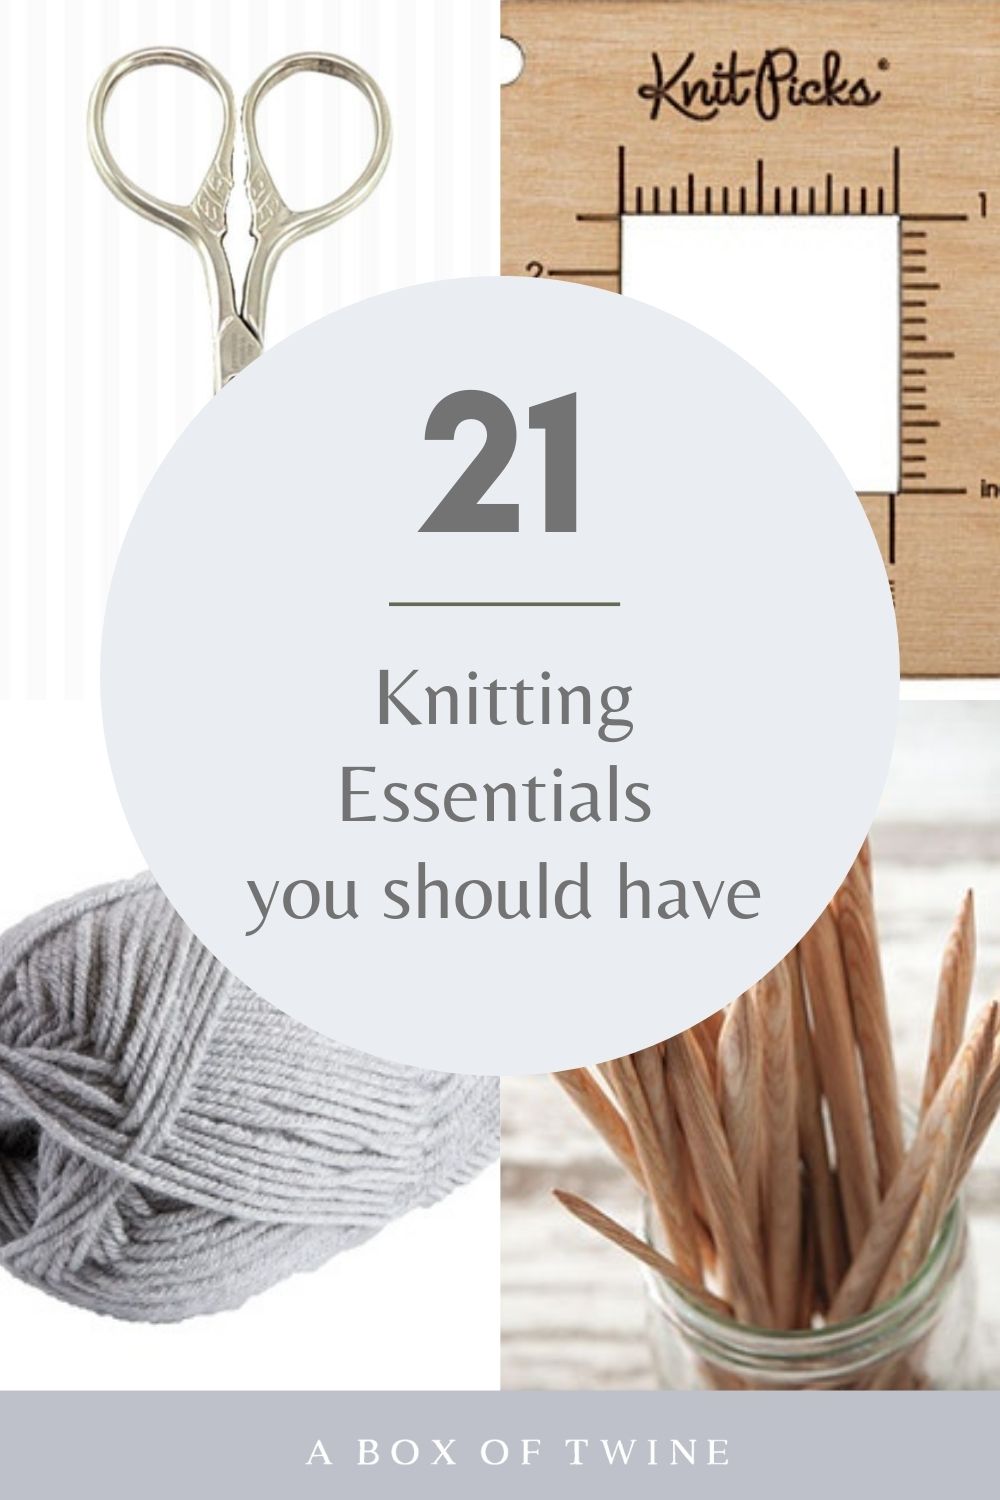 10 Essential Items for Knitting and Traveling